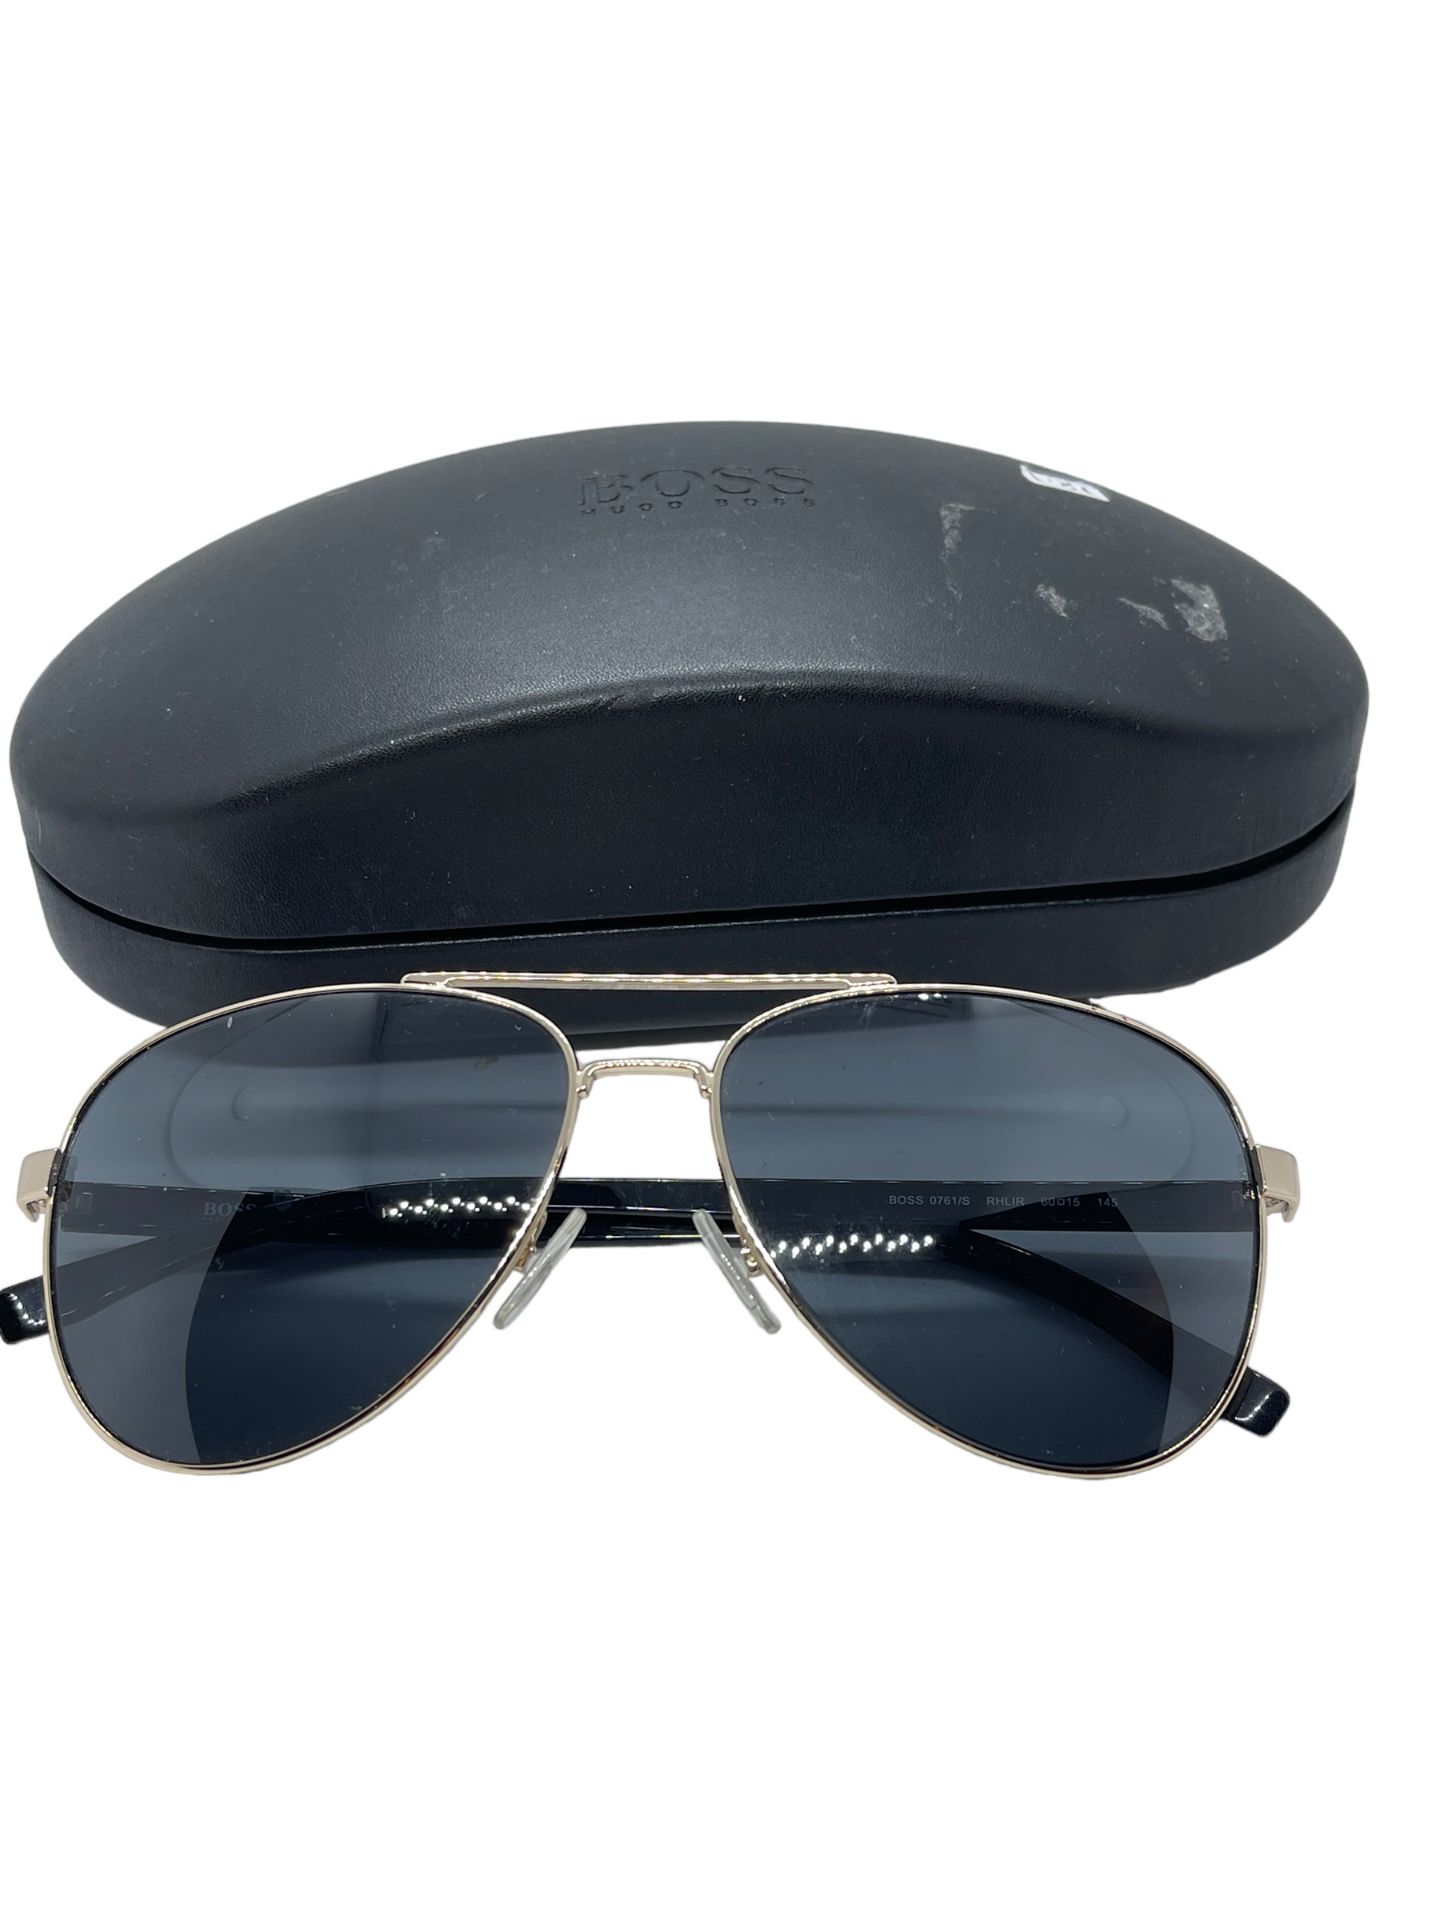 Hugo Boss Sunglasses gold plated aviators with case surplus stock xdemo - Image 5 of 6